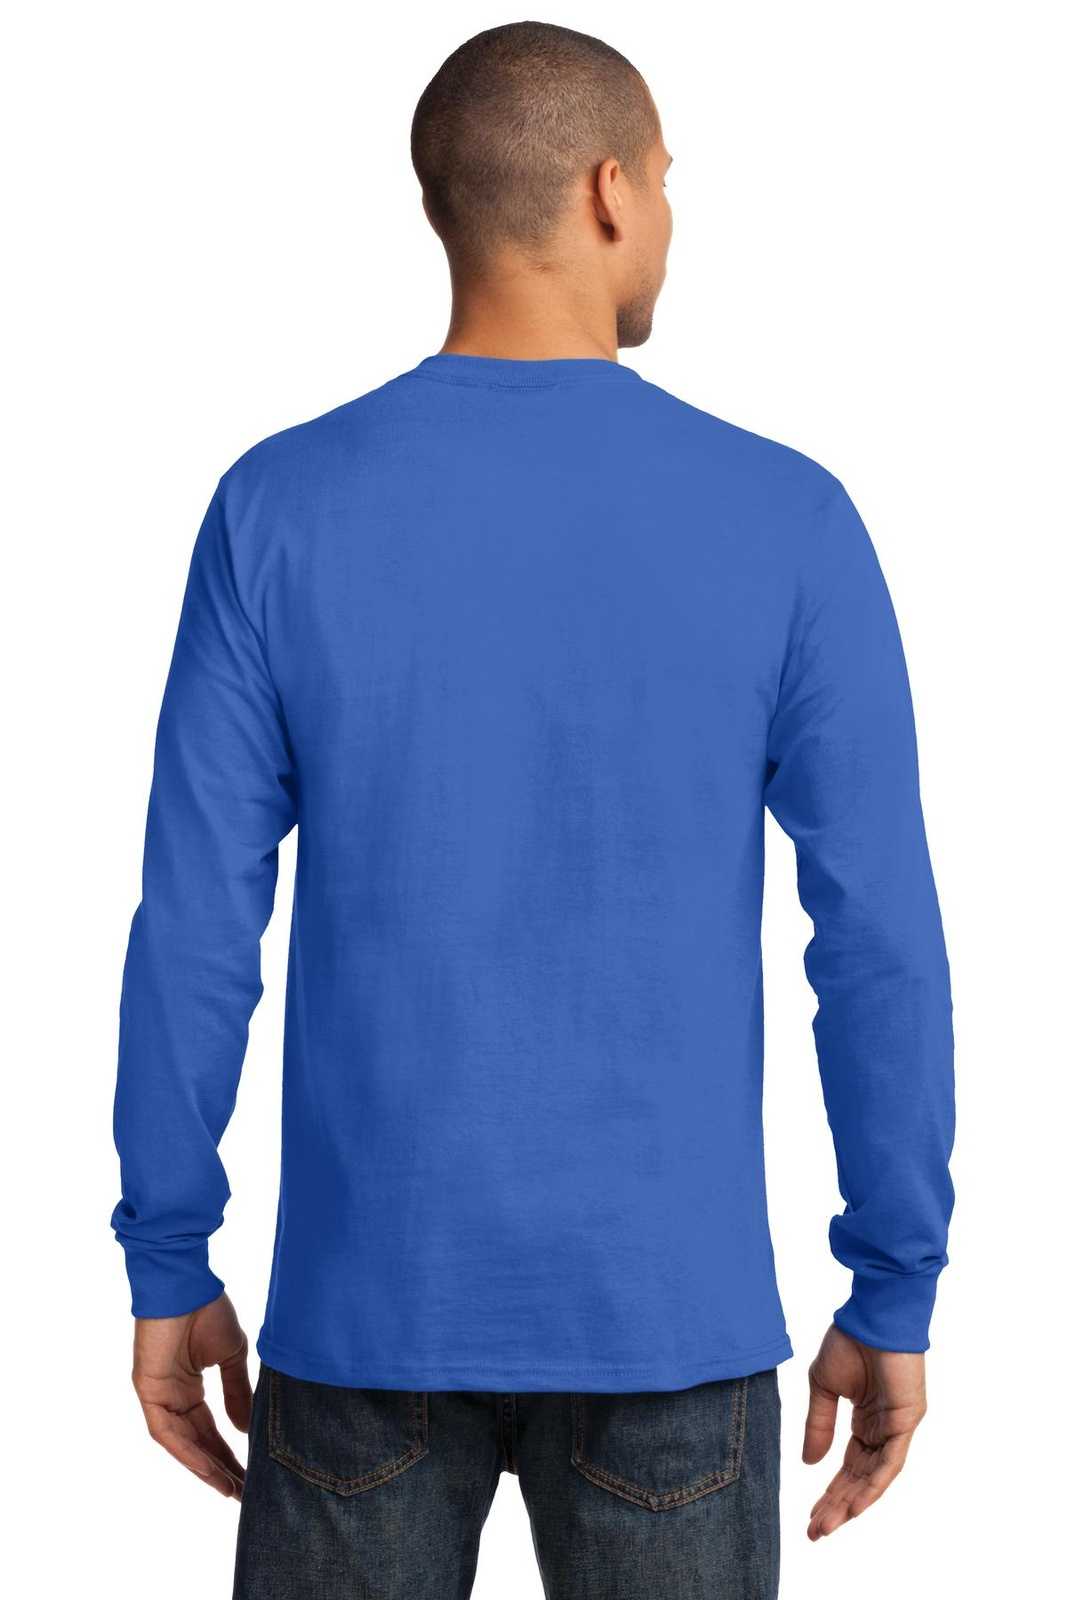 Port & Company PC61LS Long Sleeve Essential Tee - Royal - HIT a Double - 1